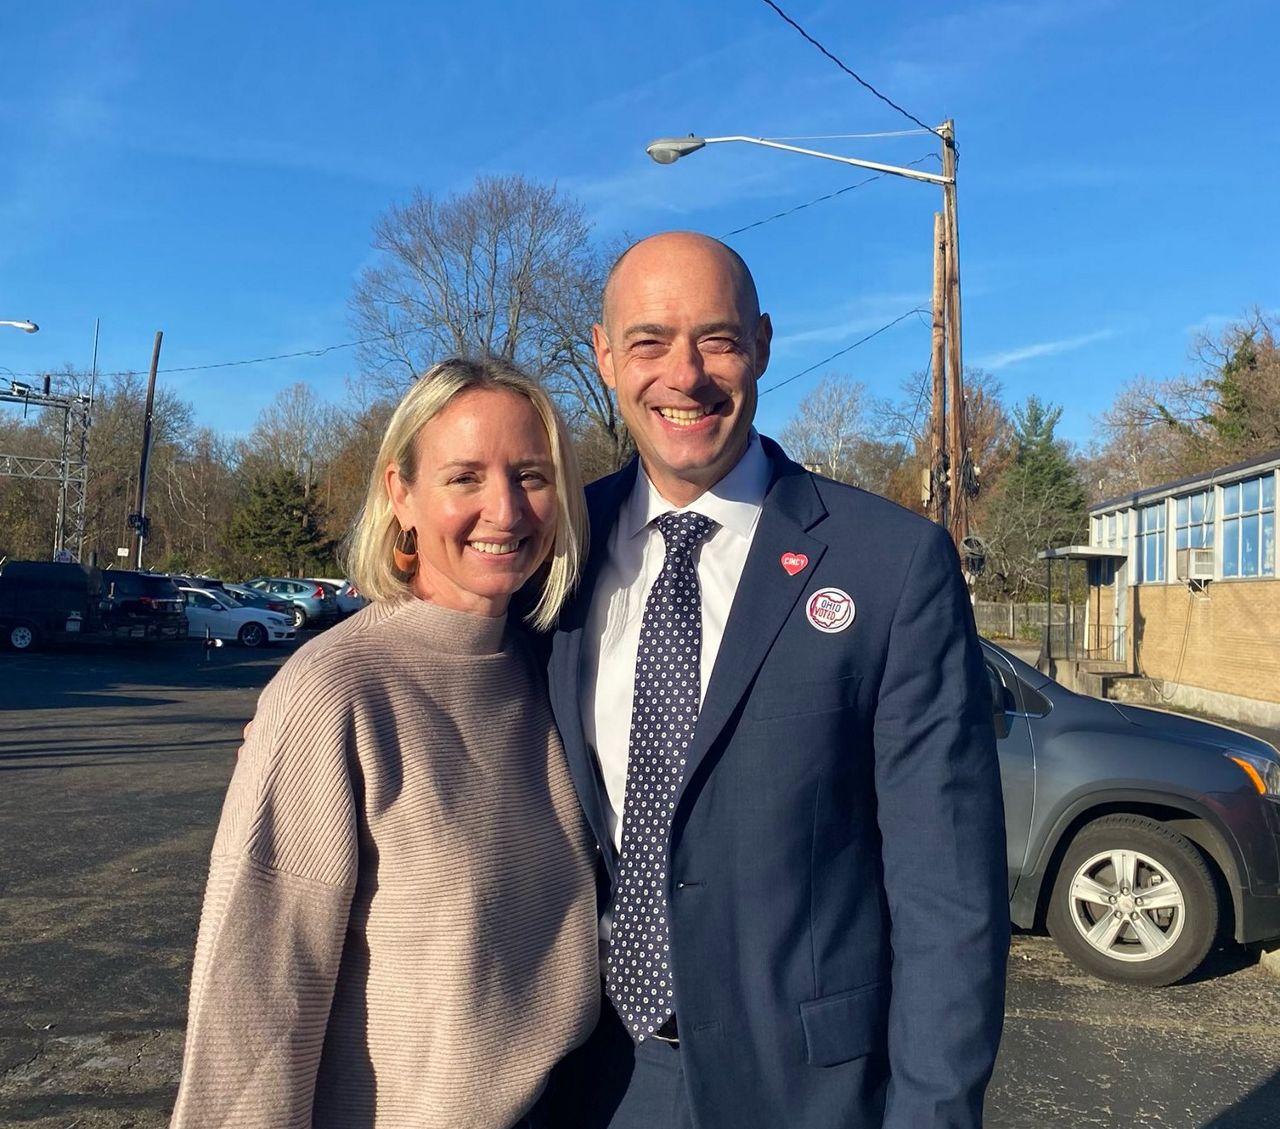 Greg Landsman poses with his wife after voting on Election Day 2022. (Photo courtesy of Greg Landsman)